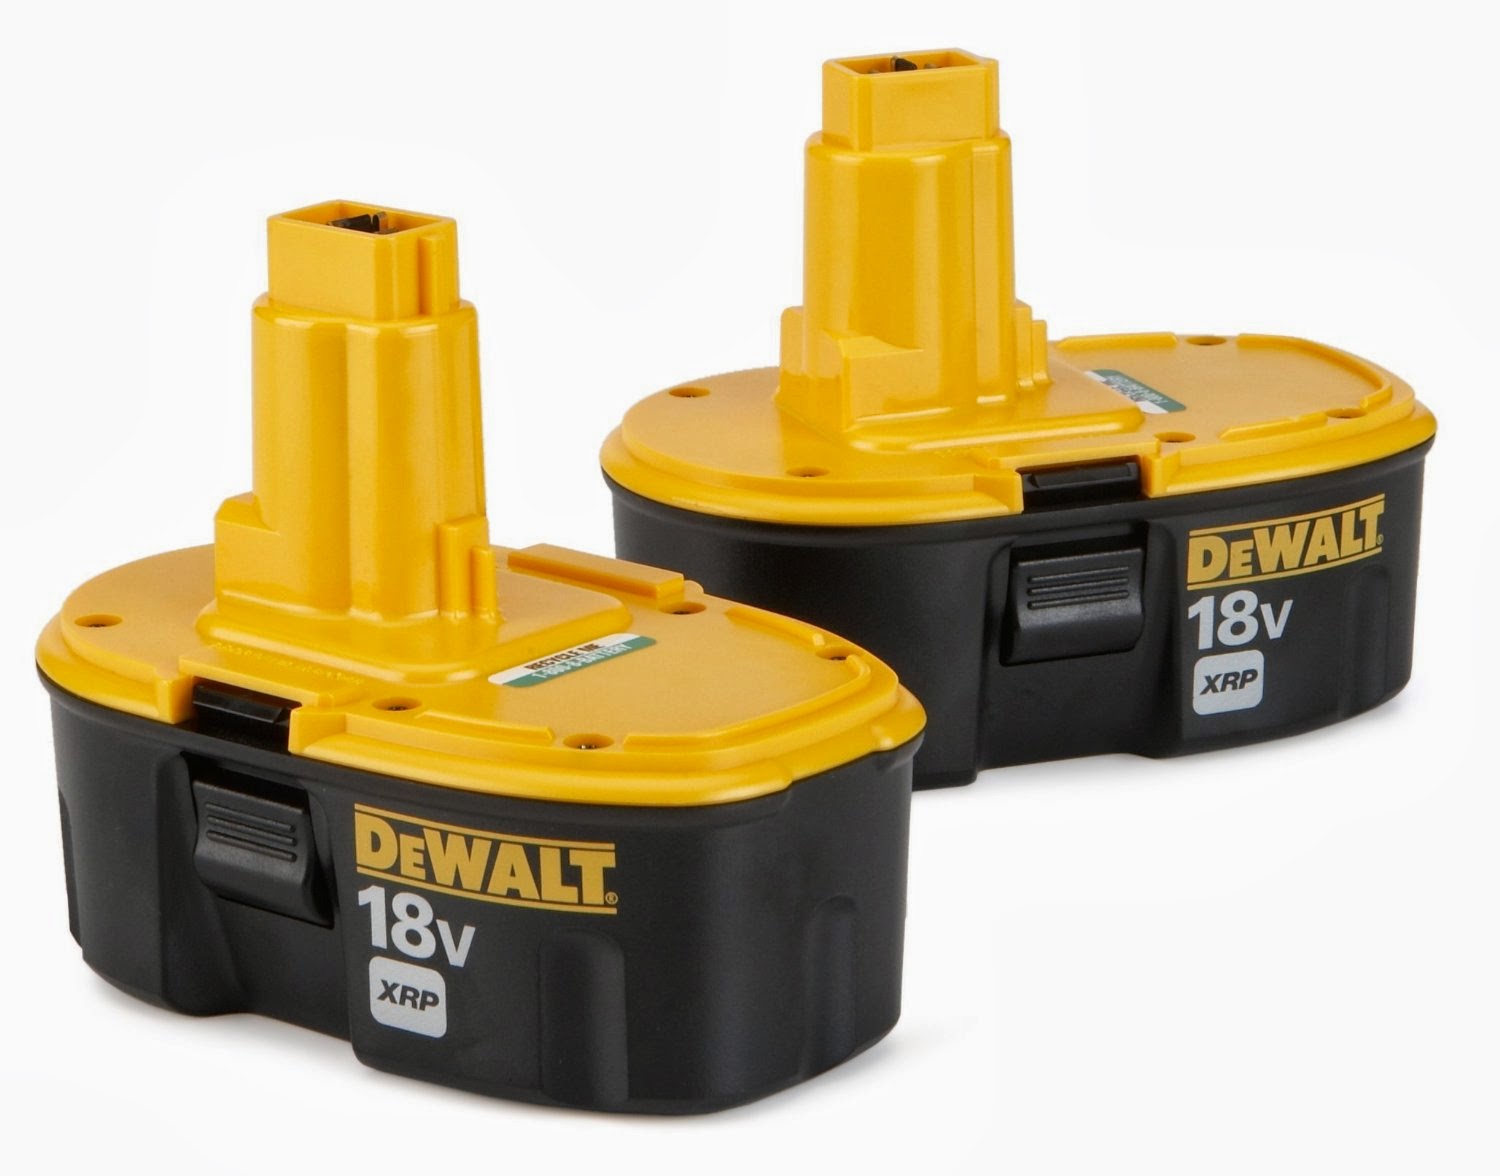 difference between dewalt 20 volt battery and xr battery